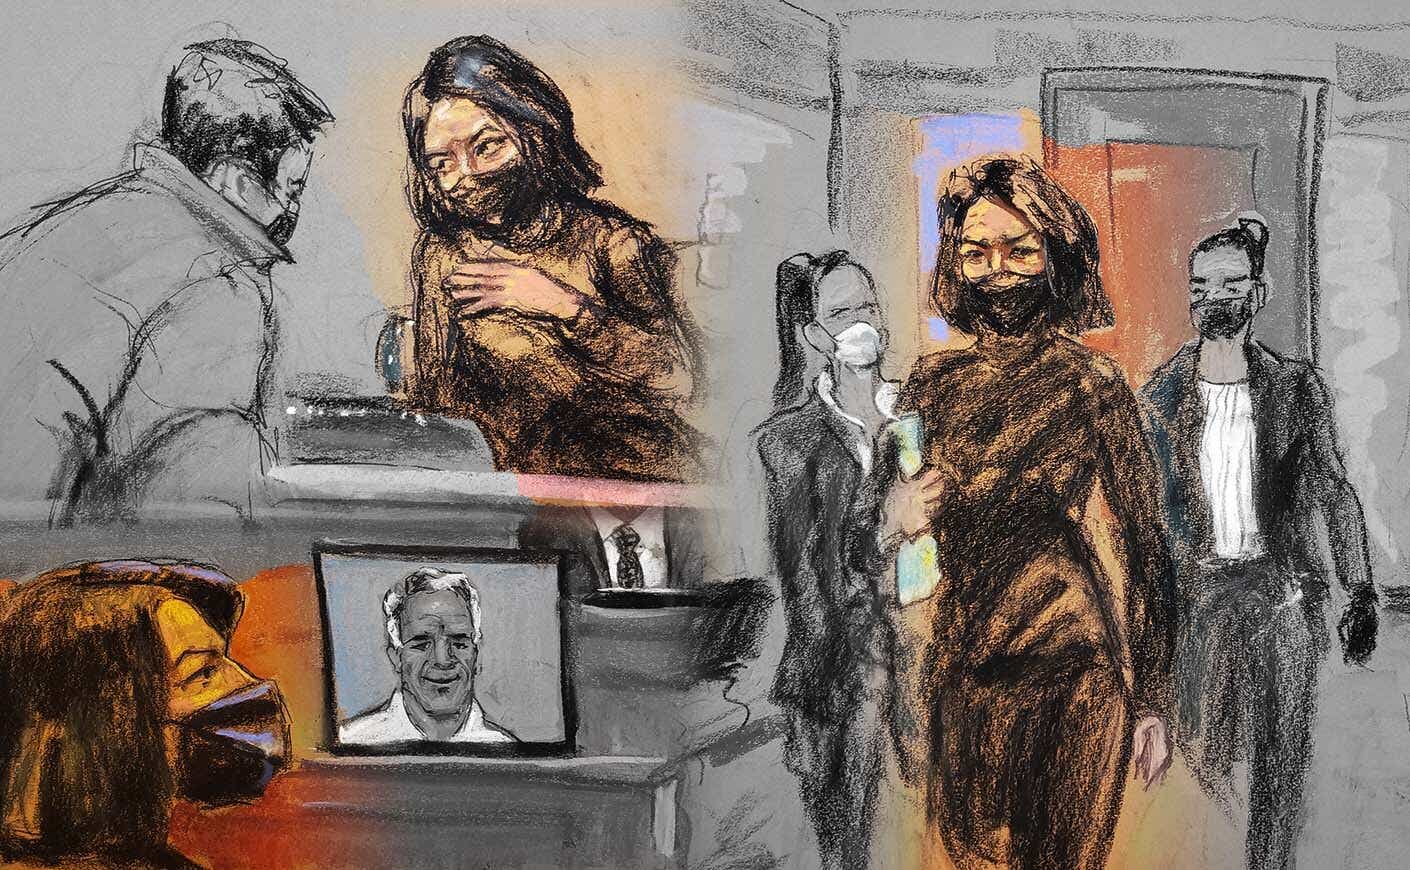 courtroom drawings of Ghislaine Maxwell